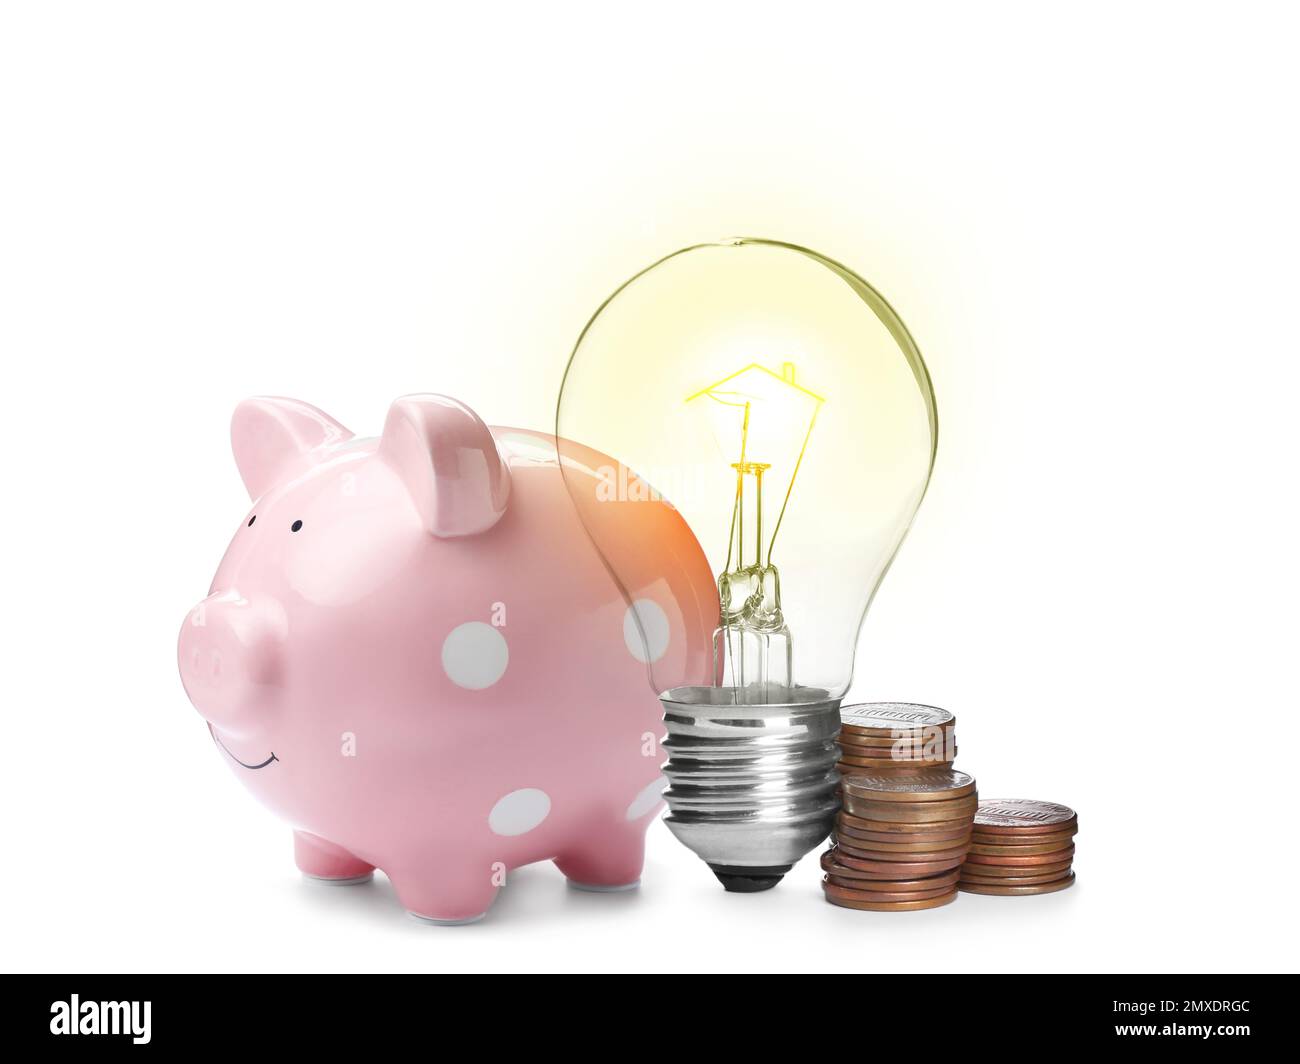 Light bulb with tungsten filament in shape on house roof, piggy bank and coins on white background. Energy efficiency, loan, property or business idea Stock Photo